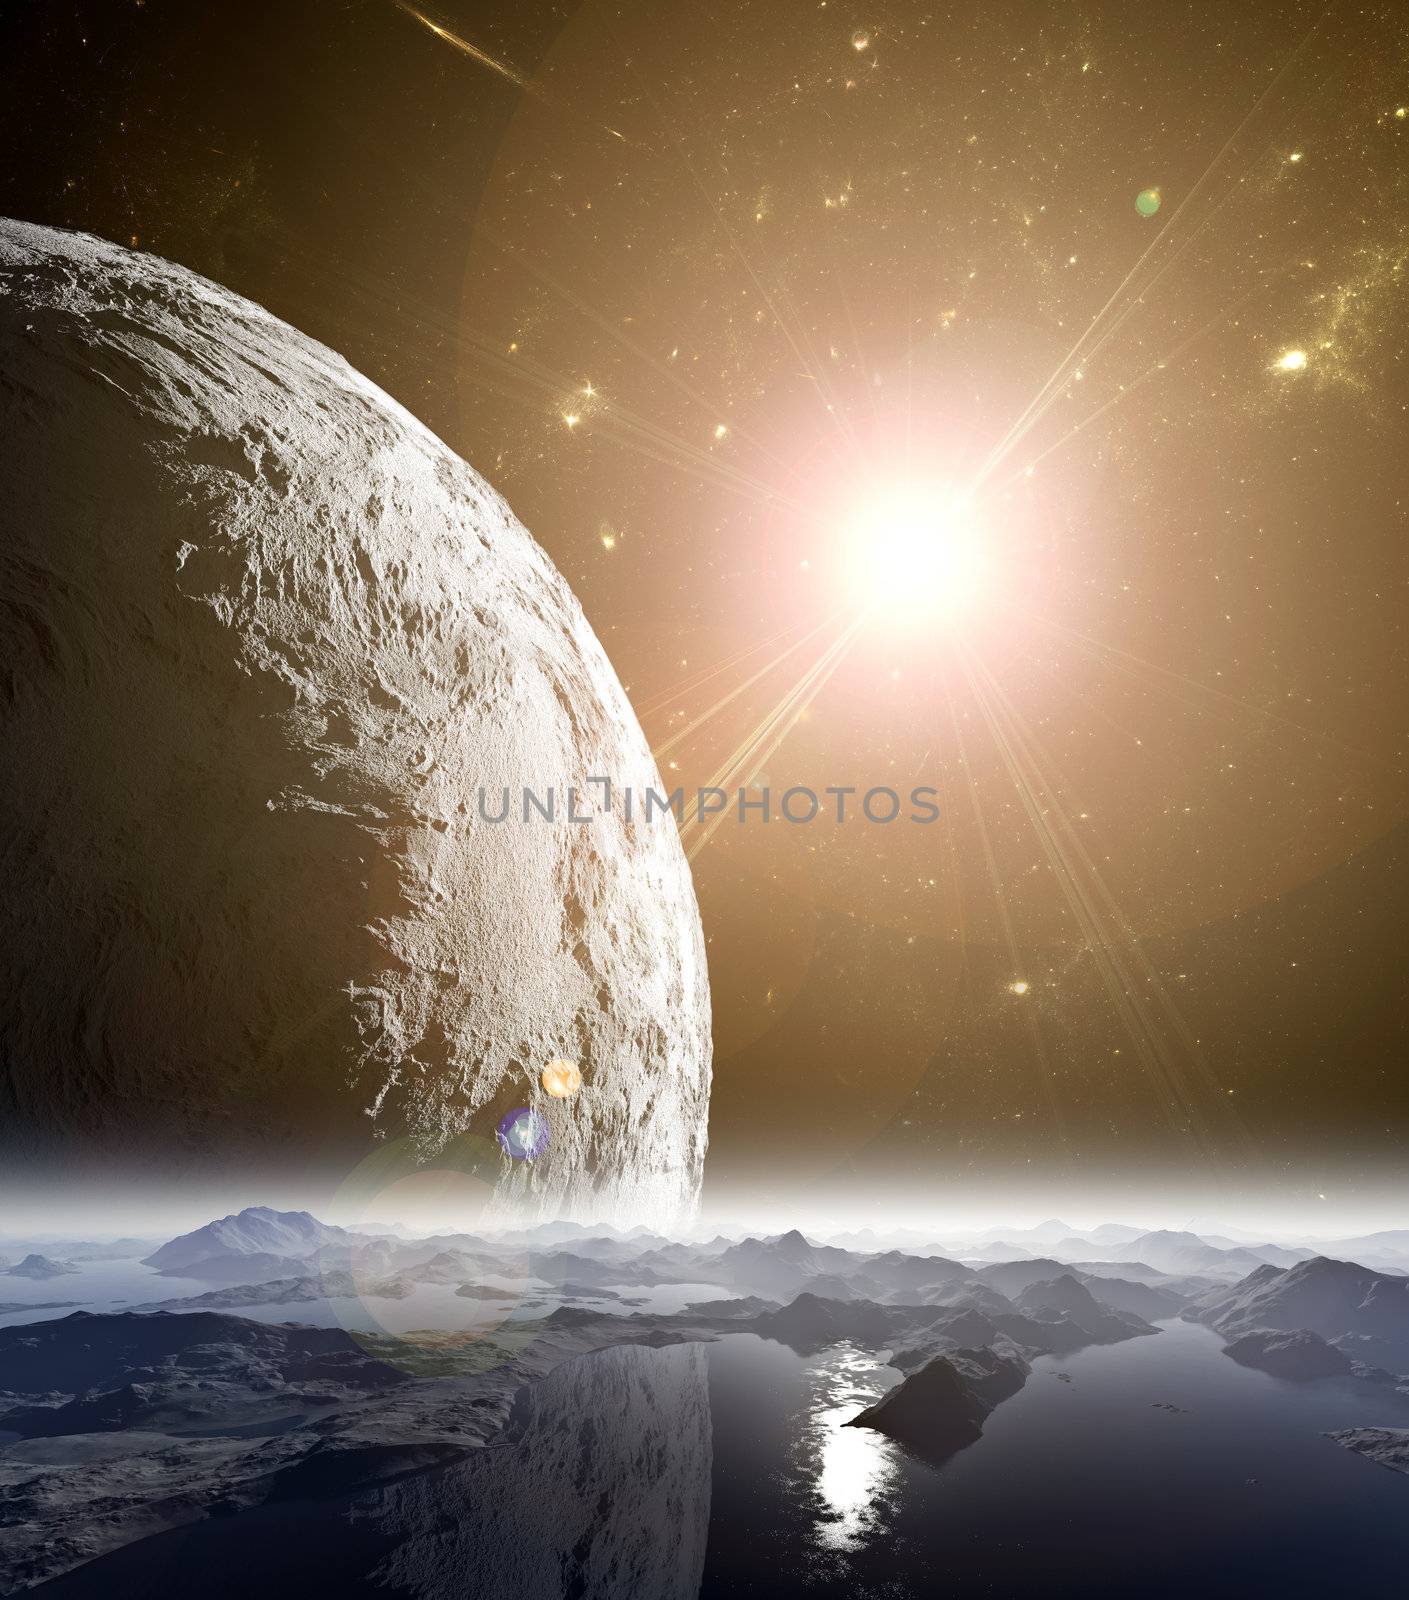 A view of planet. moons and the universe from the earth surface. Abstract illustration of distant regions.